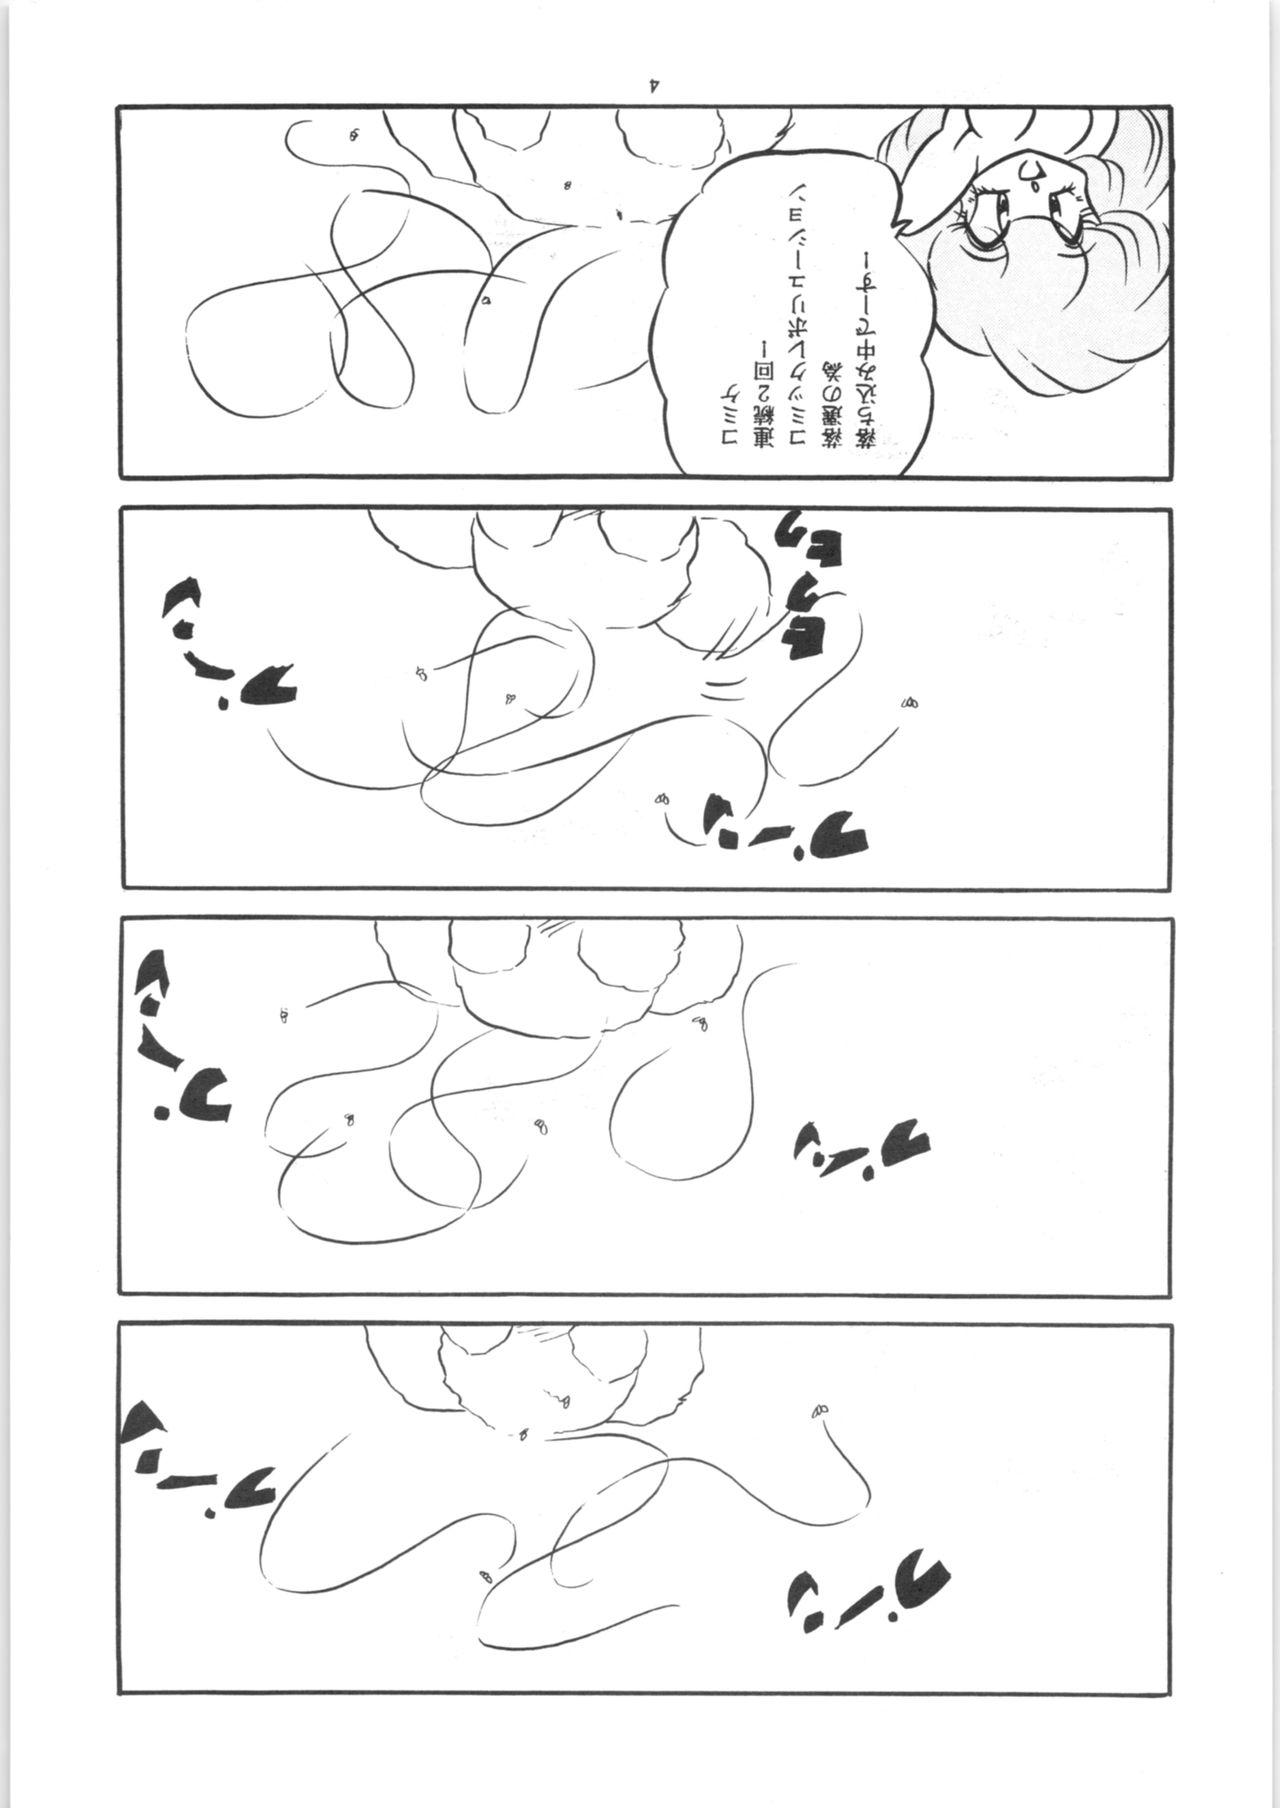 Cock C-COMPANY SPECIAL STAGE 18 - Ranma 12 Idol project Femboy - Page 4